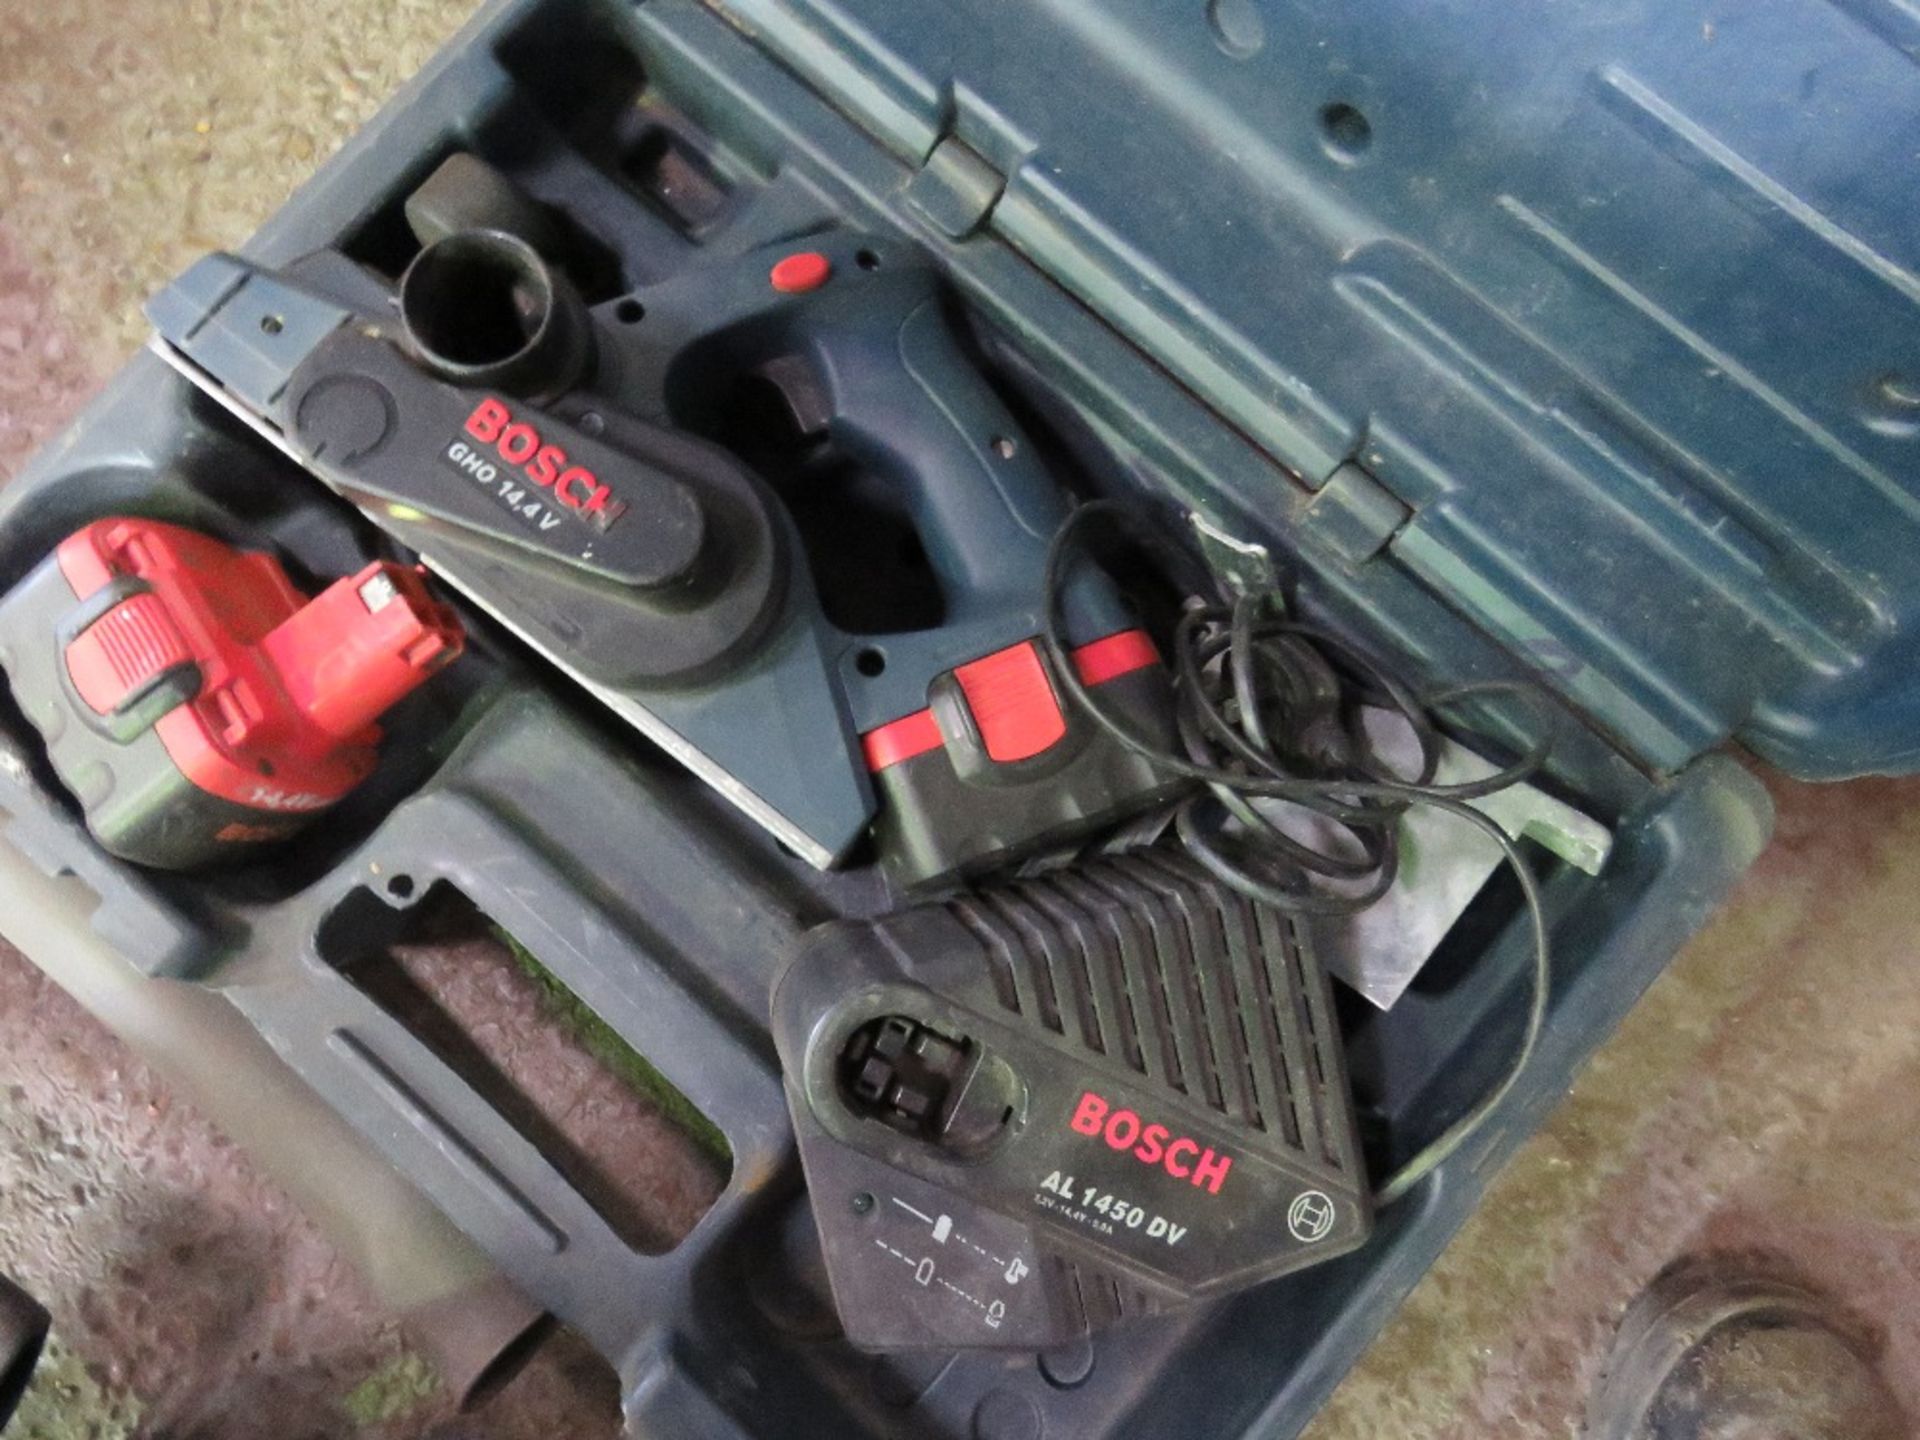 BOSCH BATTERY POWERED PLANER. - Image 2 of 3